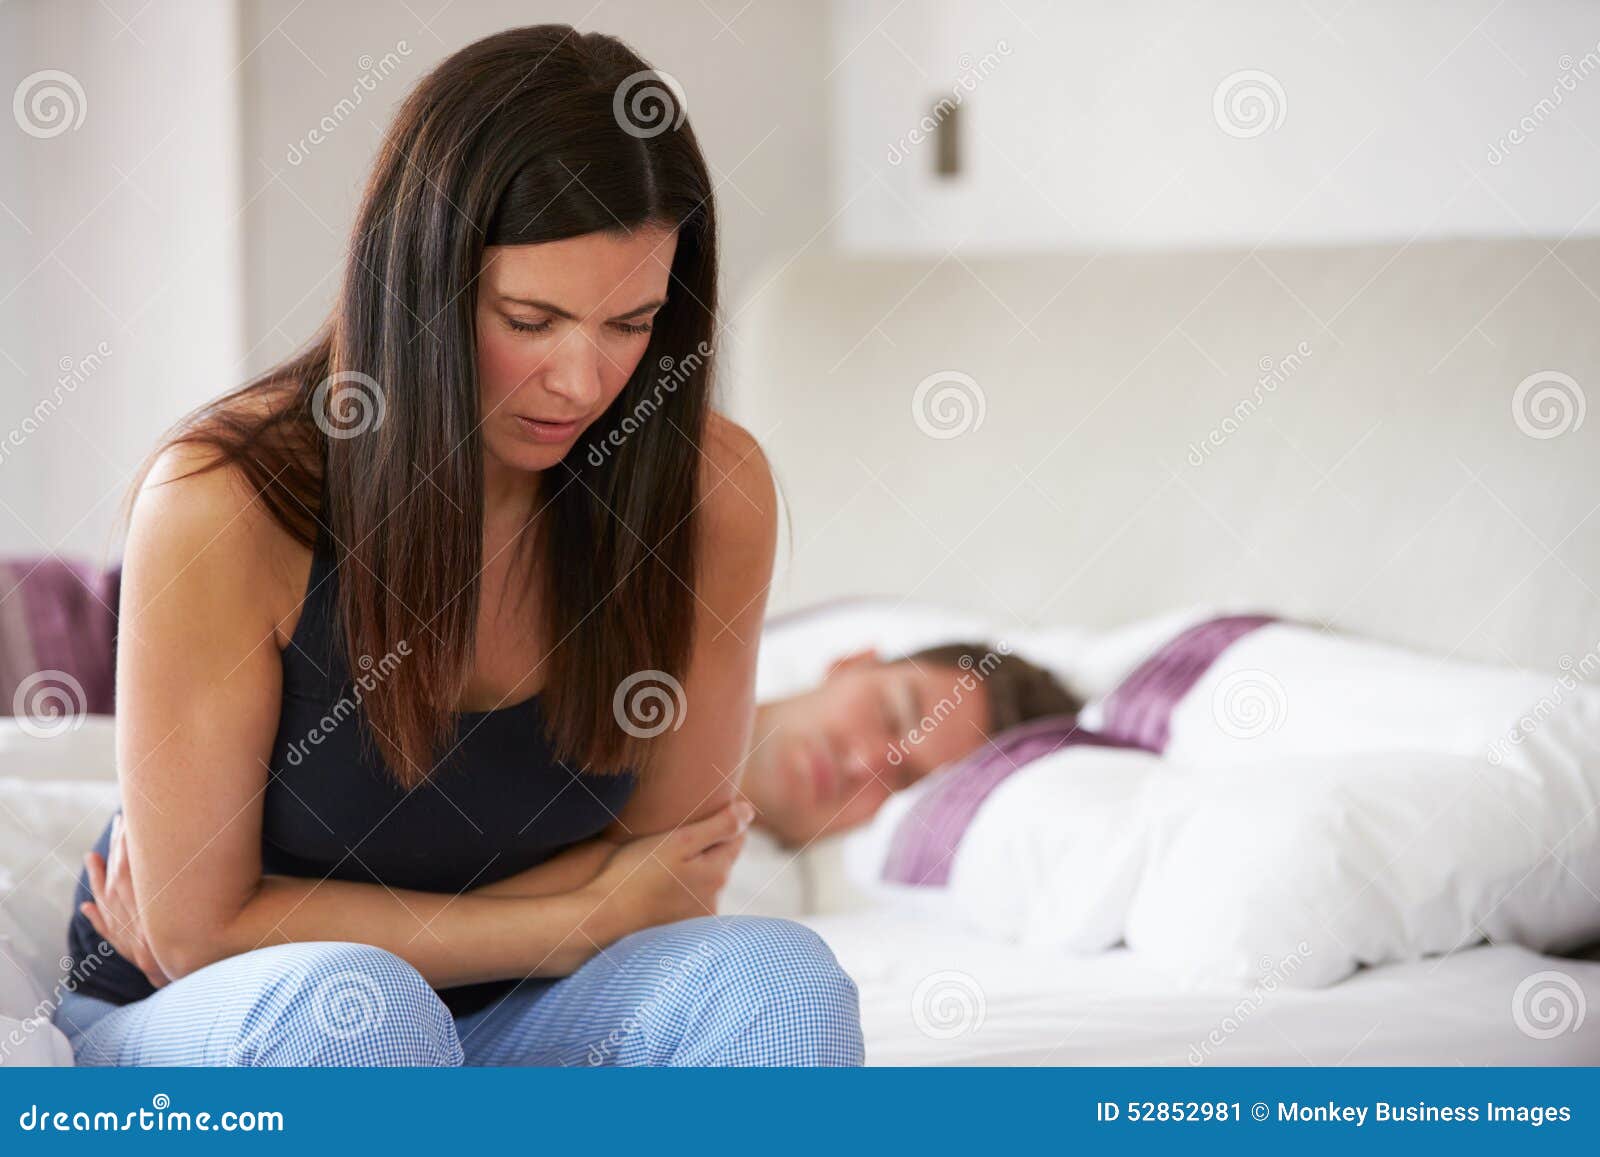 woman sitting on bed and feeling unwell